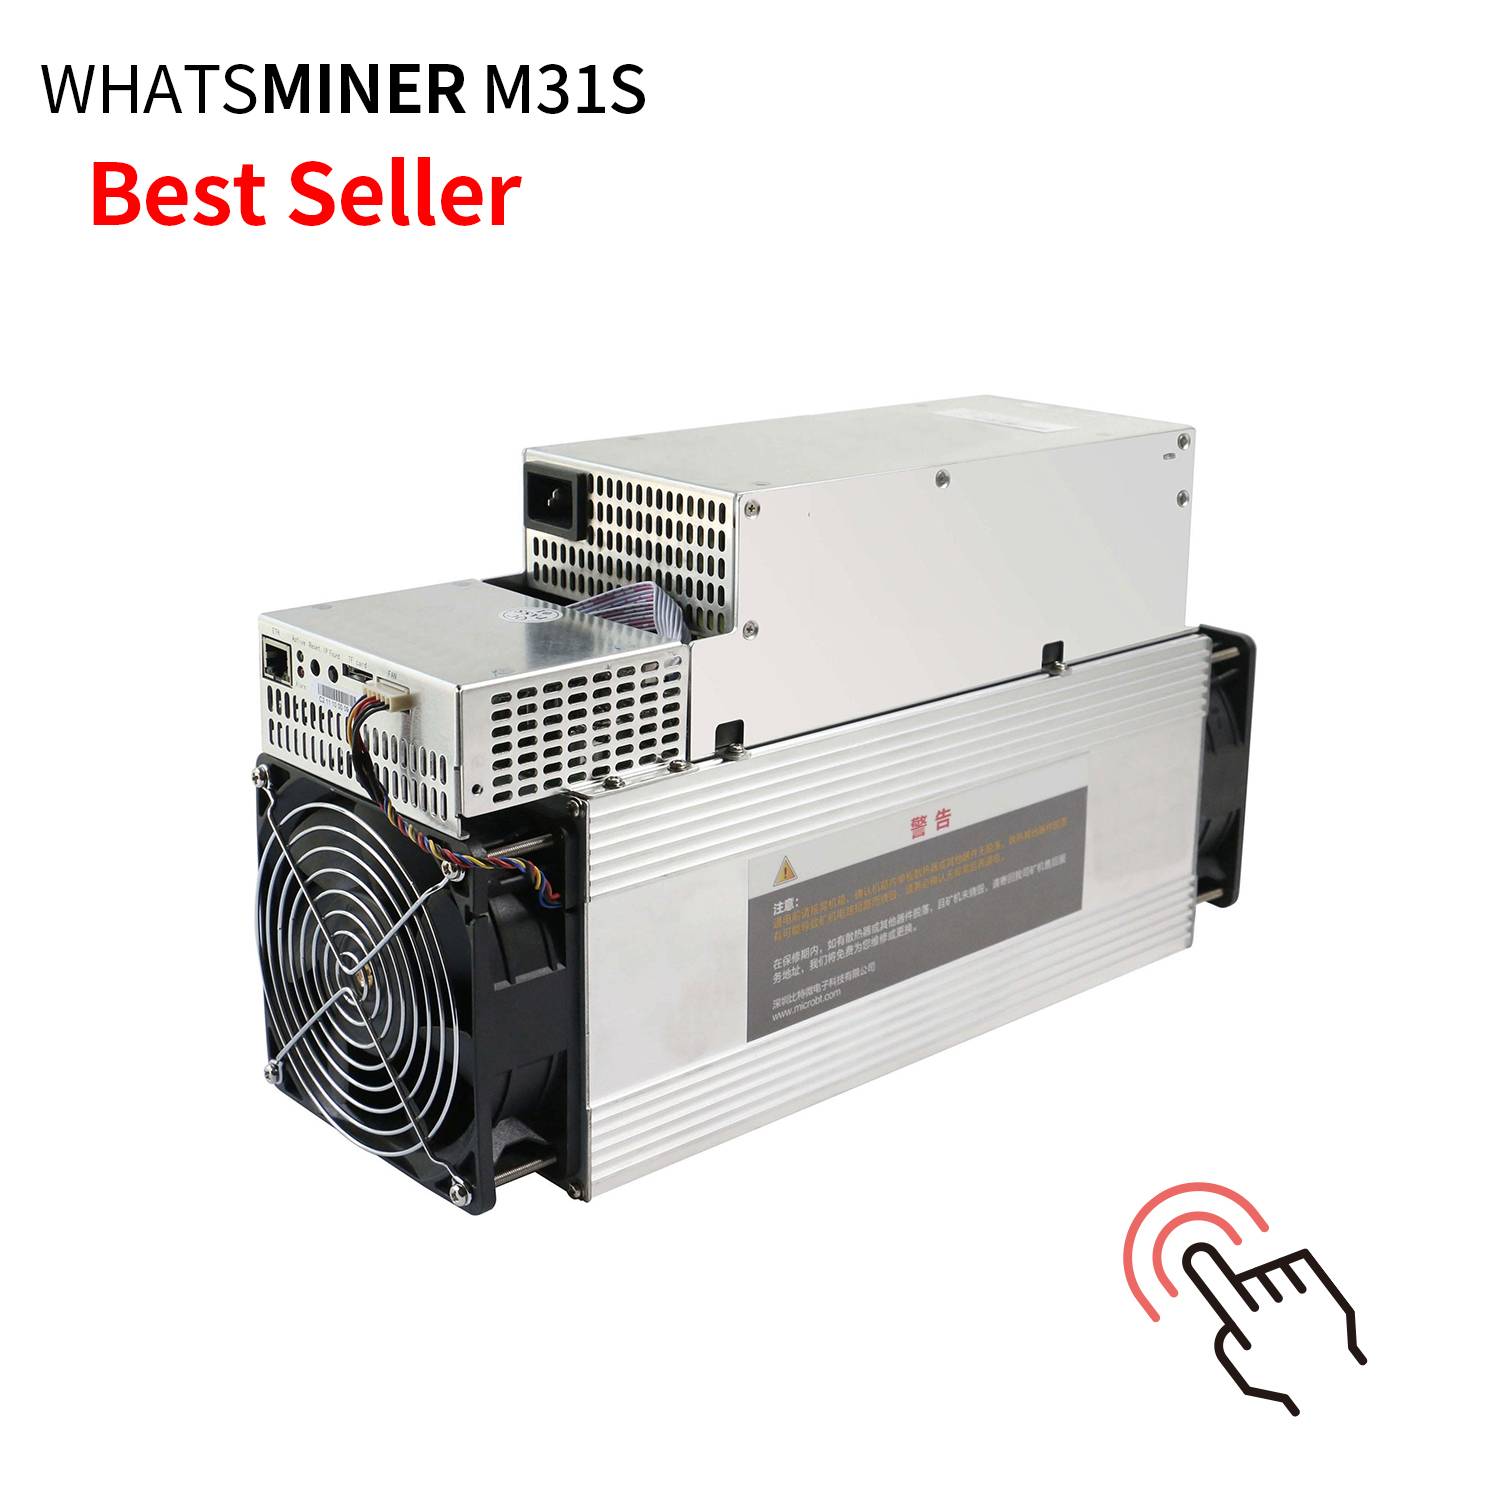 China High Profitability MicroBT Whatsminer M31S 70Th/s ...